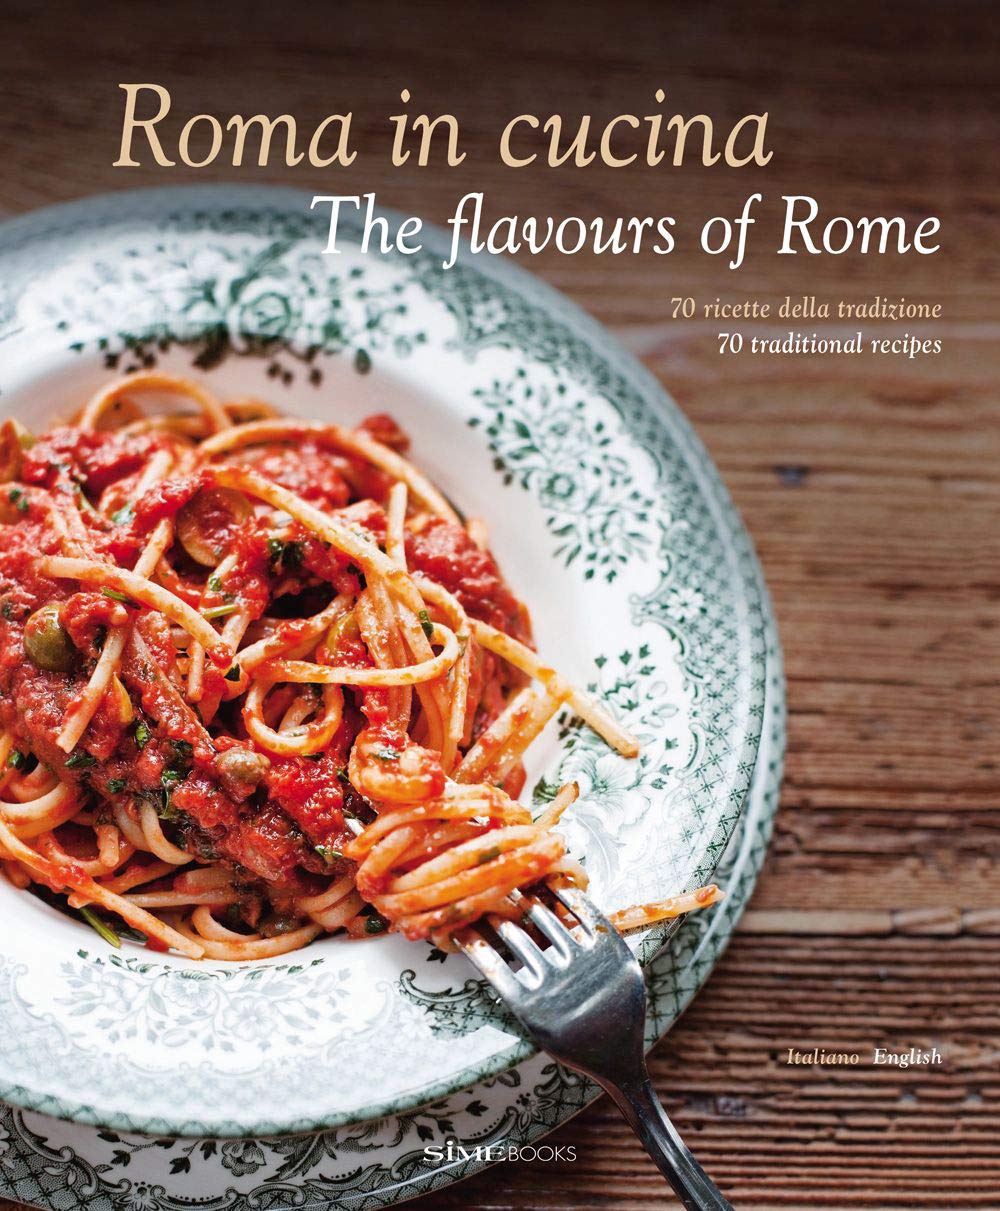 Roma in Cucina: The Flavours of Rome (Italian Edition)